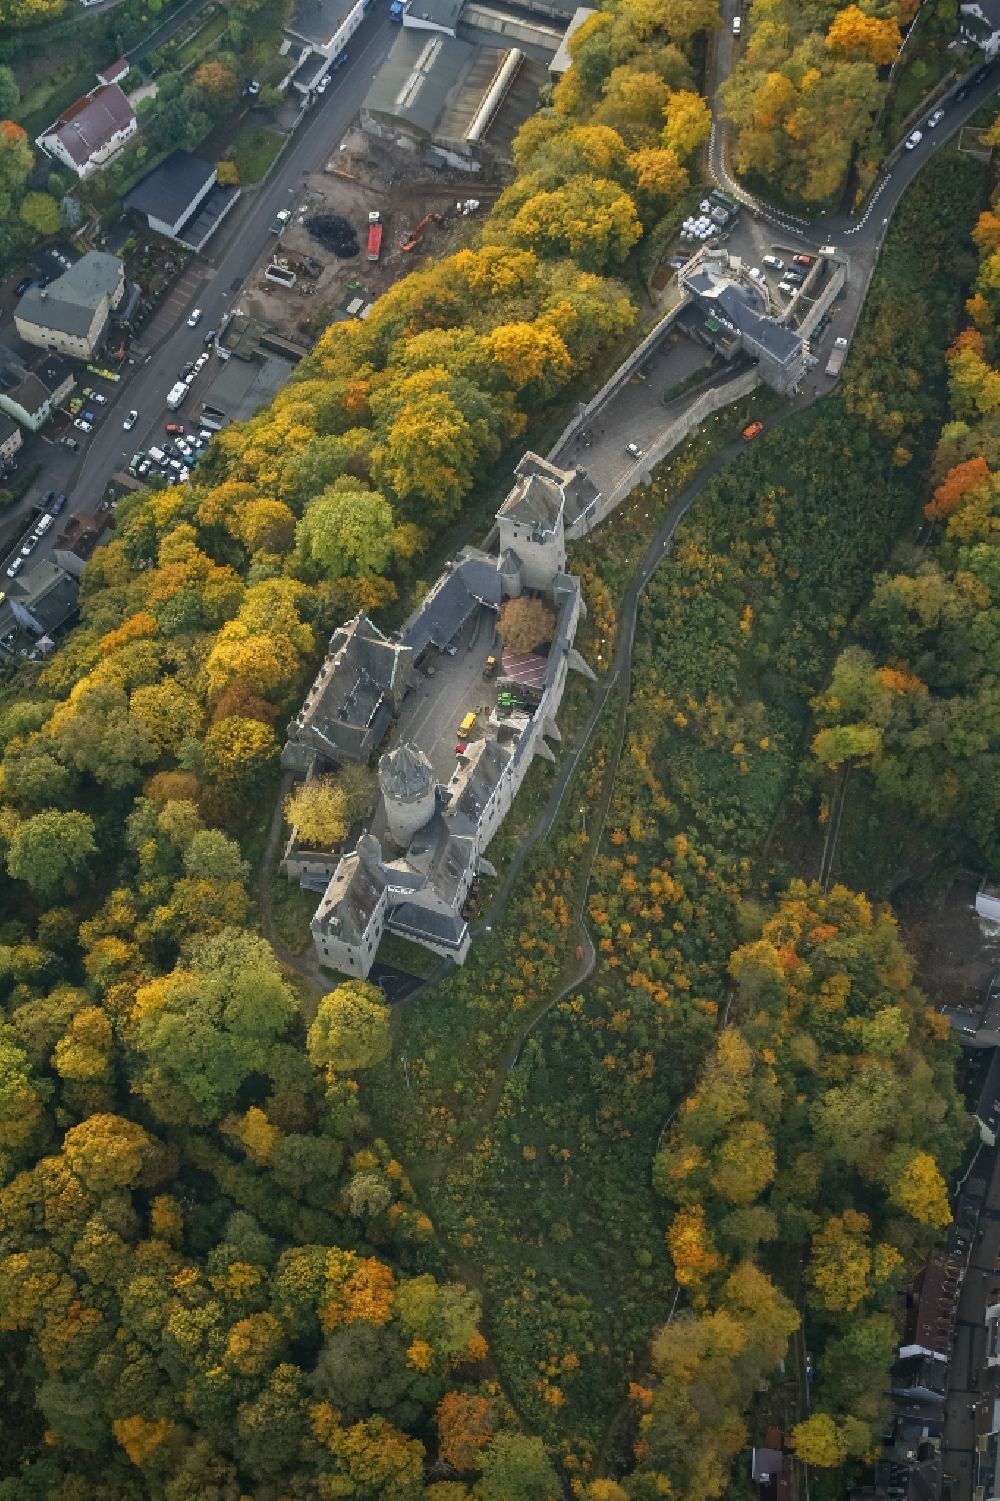 Altena from above - Burg Altena in Altena in the Sauerland in North Rhine-Westphalia NRW. It was built in the 12th Century and was established as the first permanent youth hostel of the world in 1912